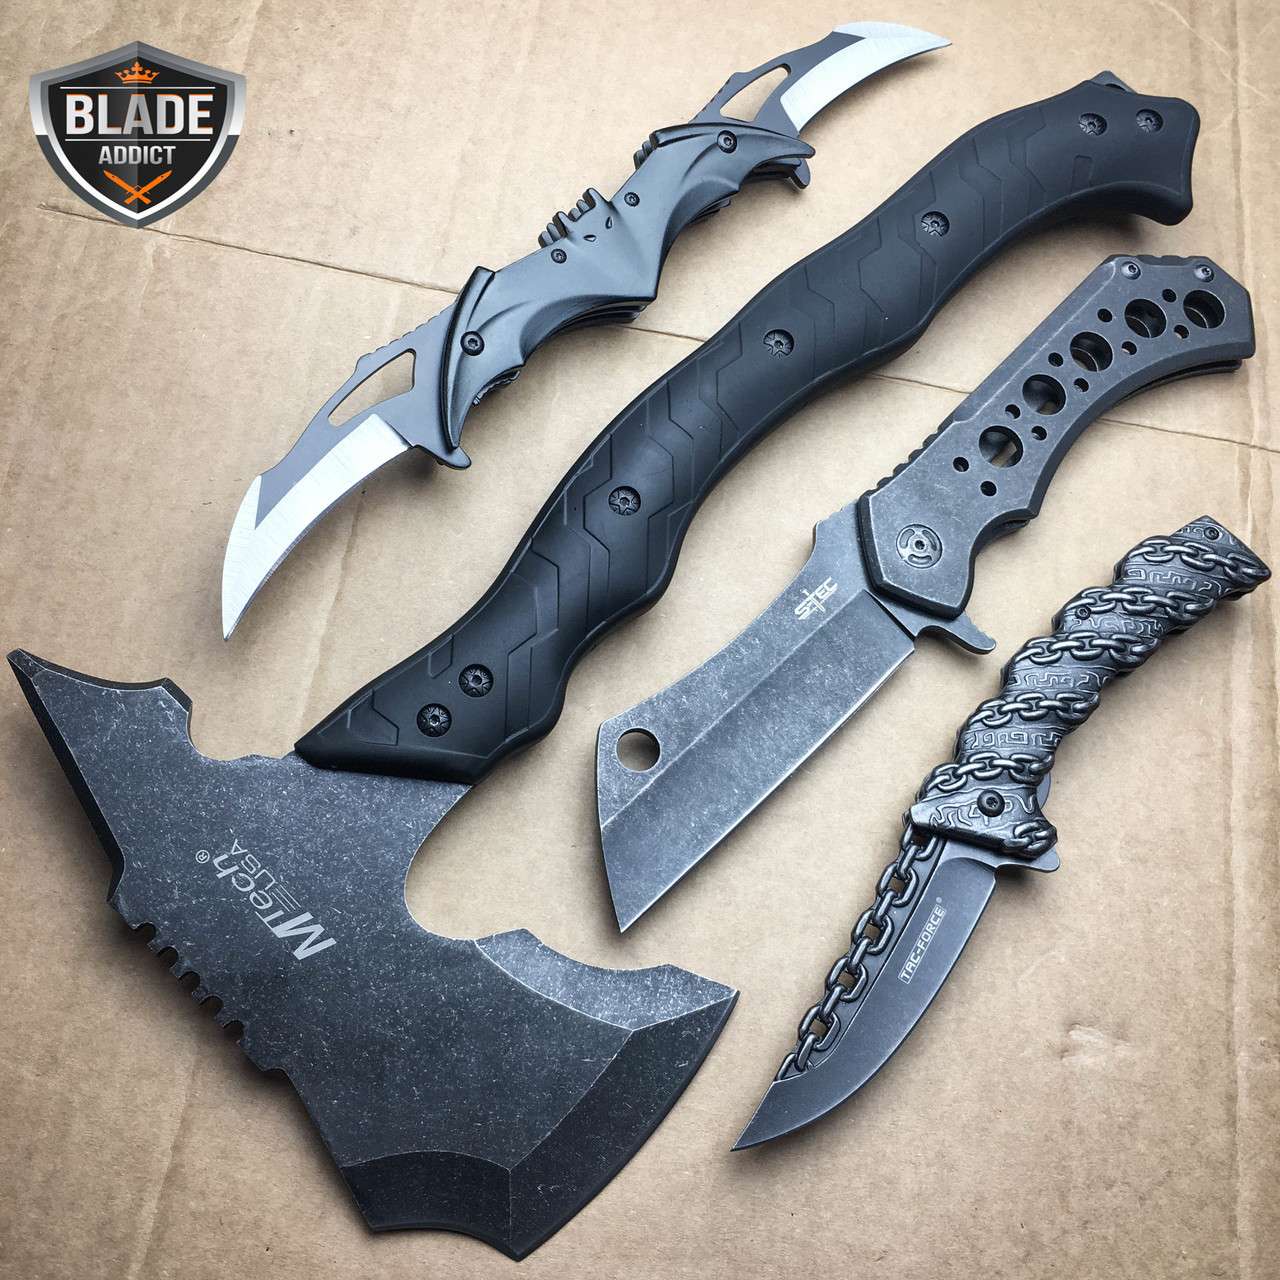 4 PC Tactical Hunting Survival Axe Bat Chain Cleaver Pocket Knife Set NEW LOT